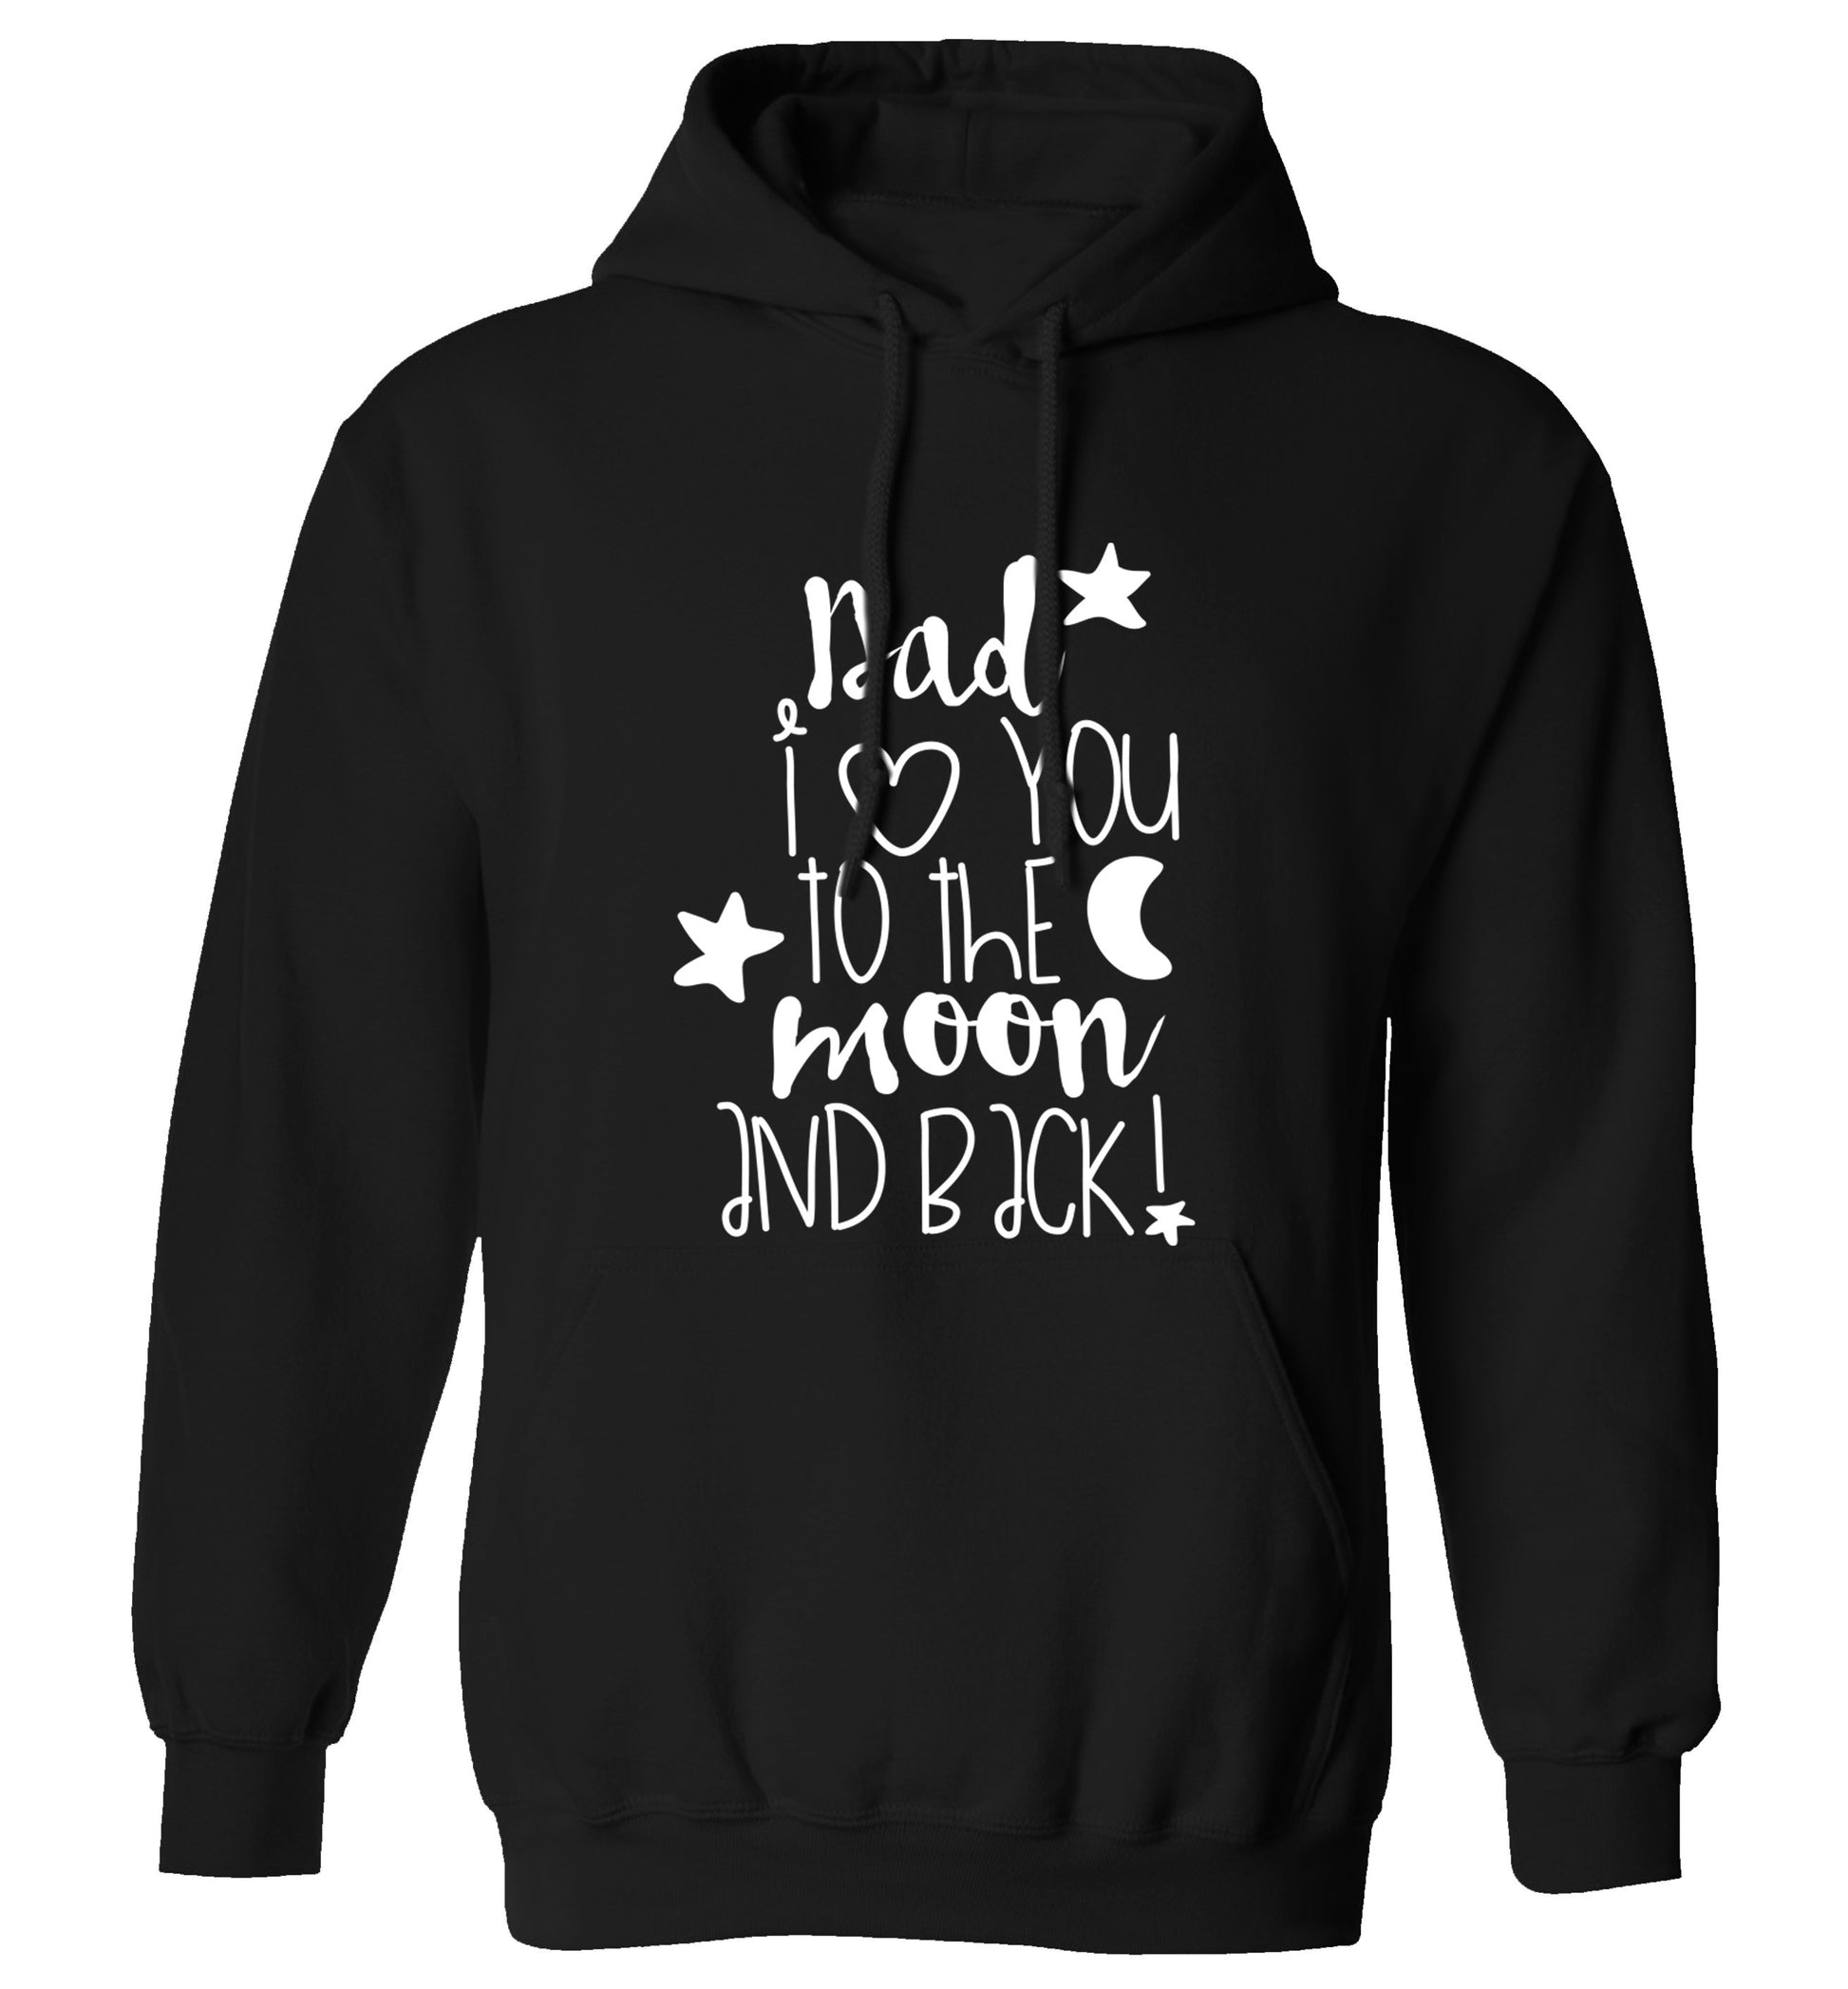 Dad I love you to the moon and back adults unisex black hoodie 2XL